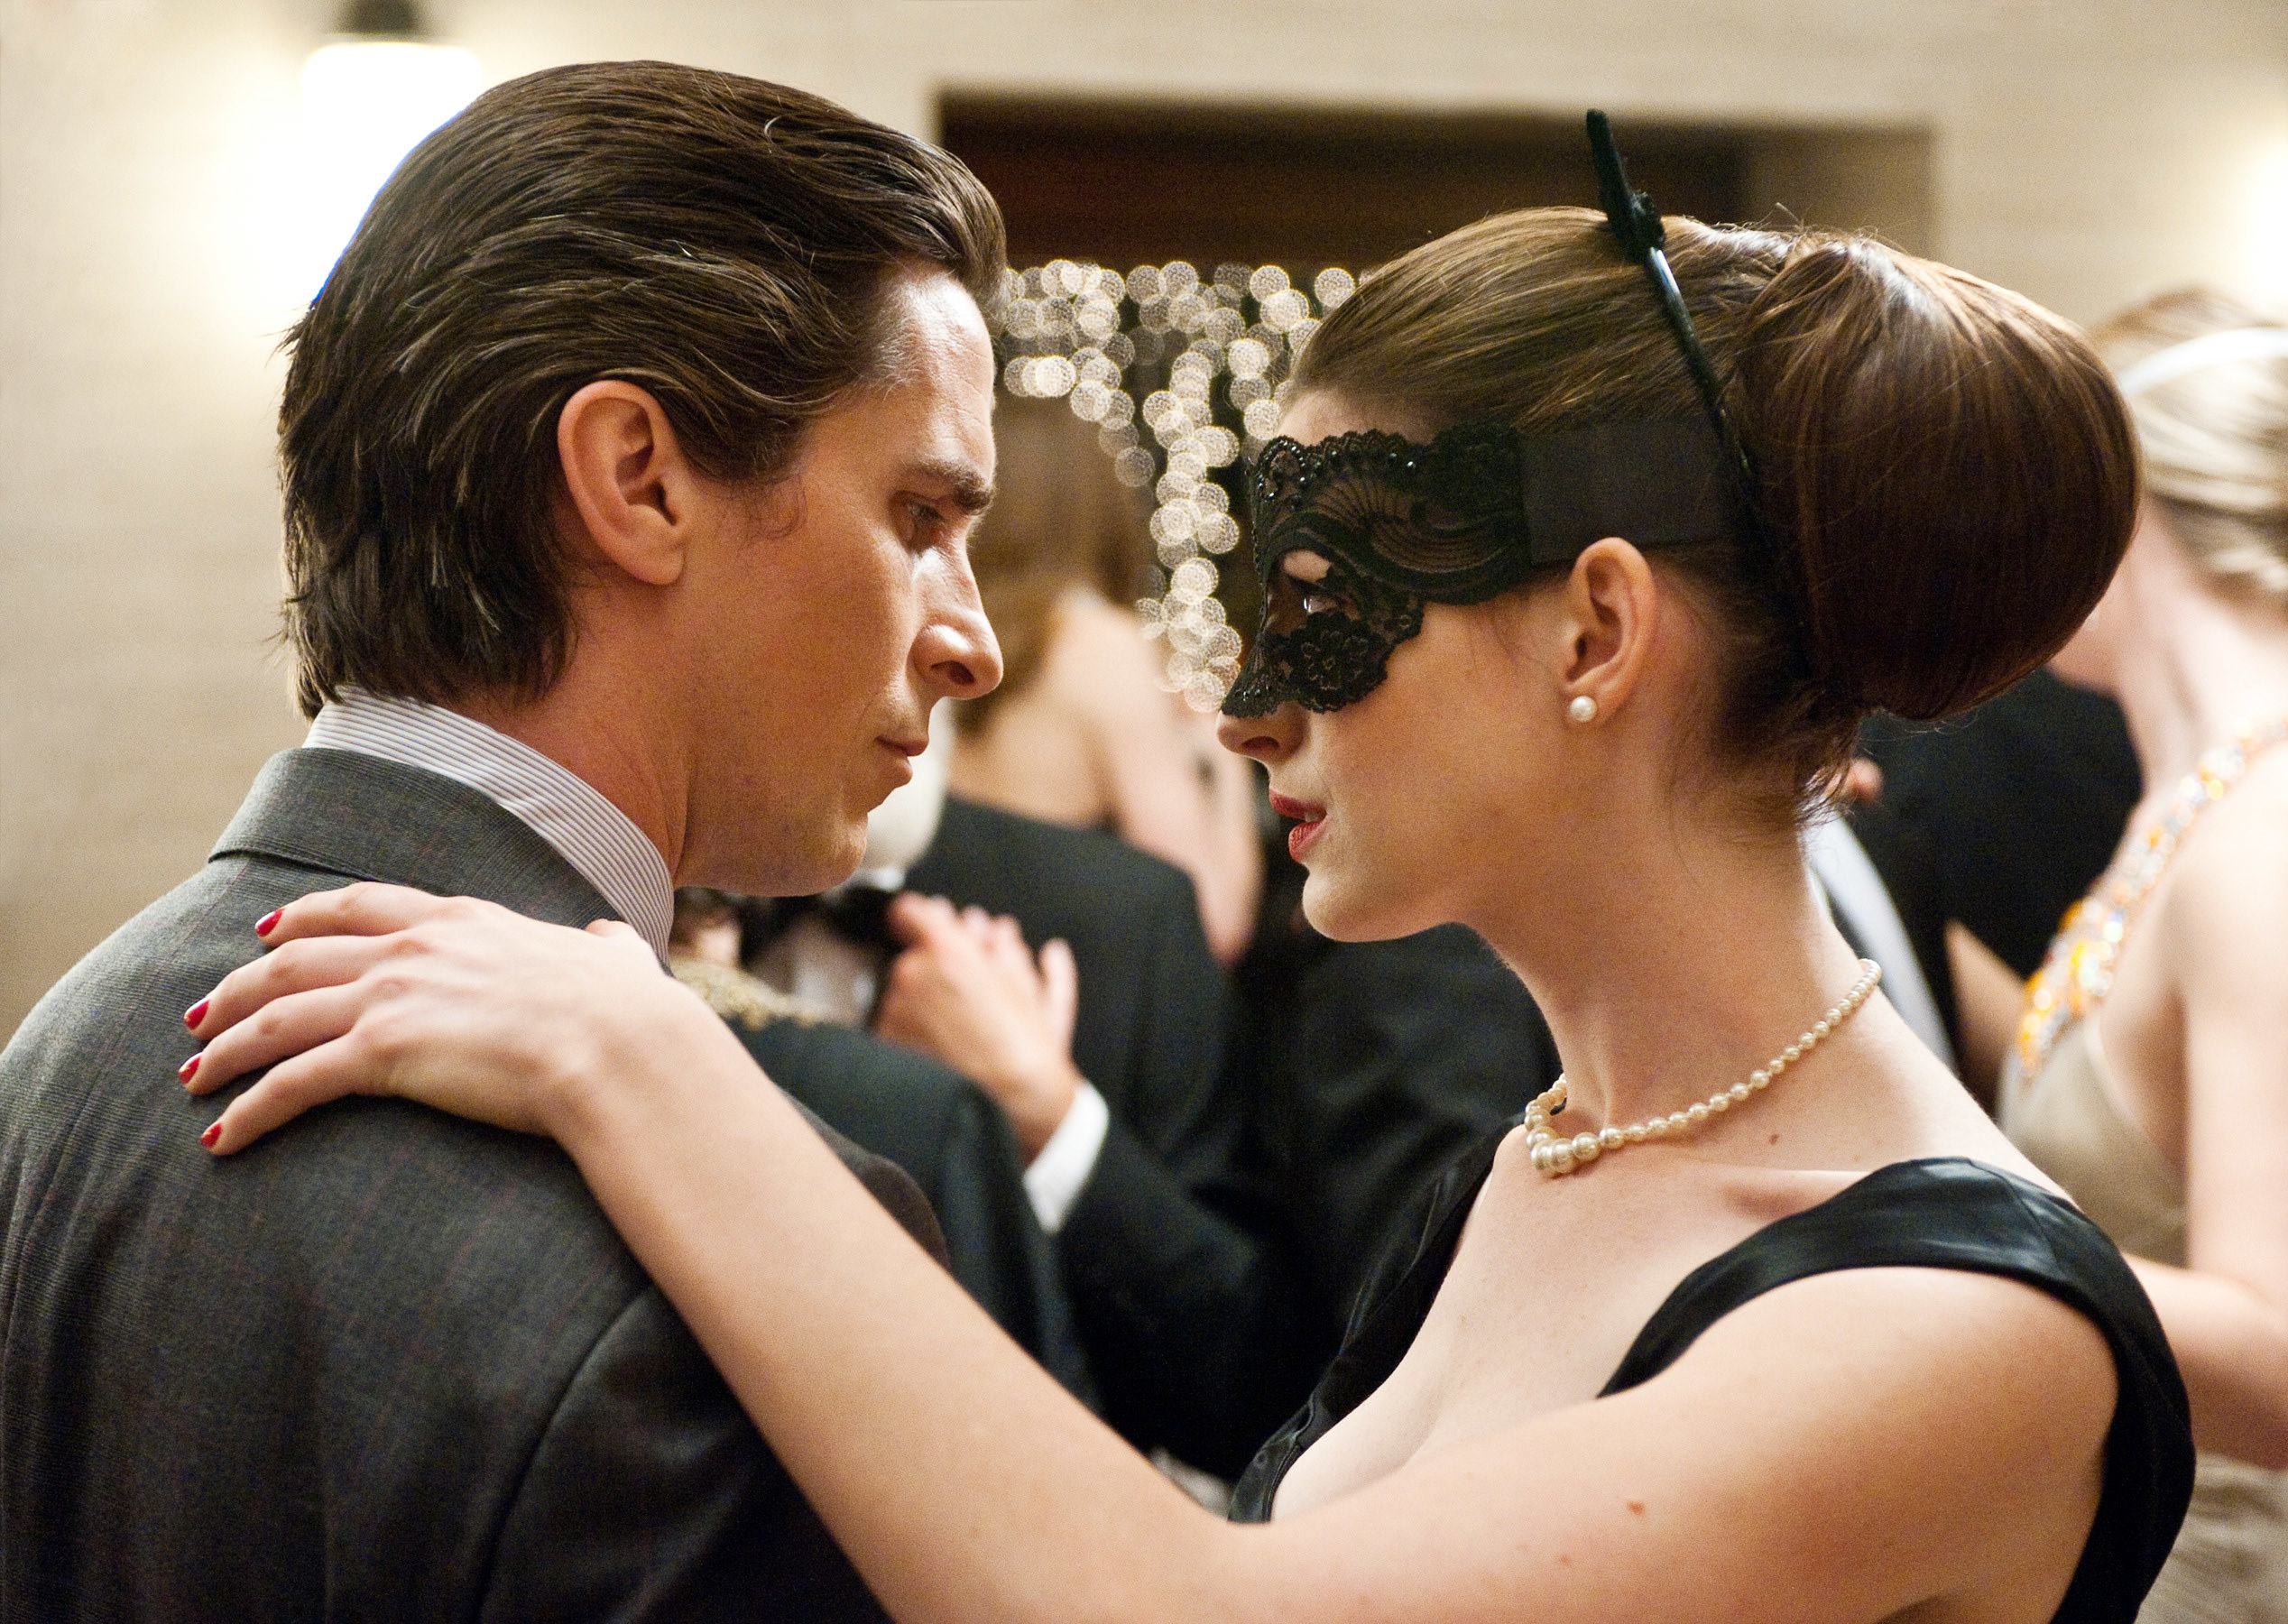 Christian Bale and Anne Hathaway dance together